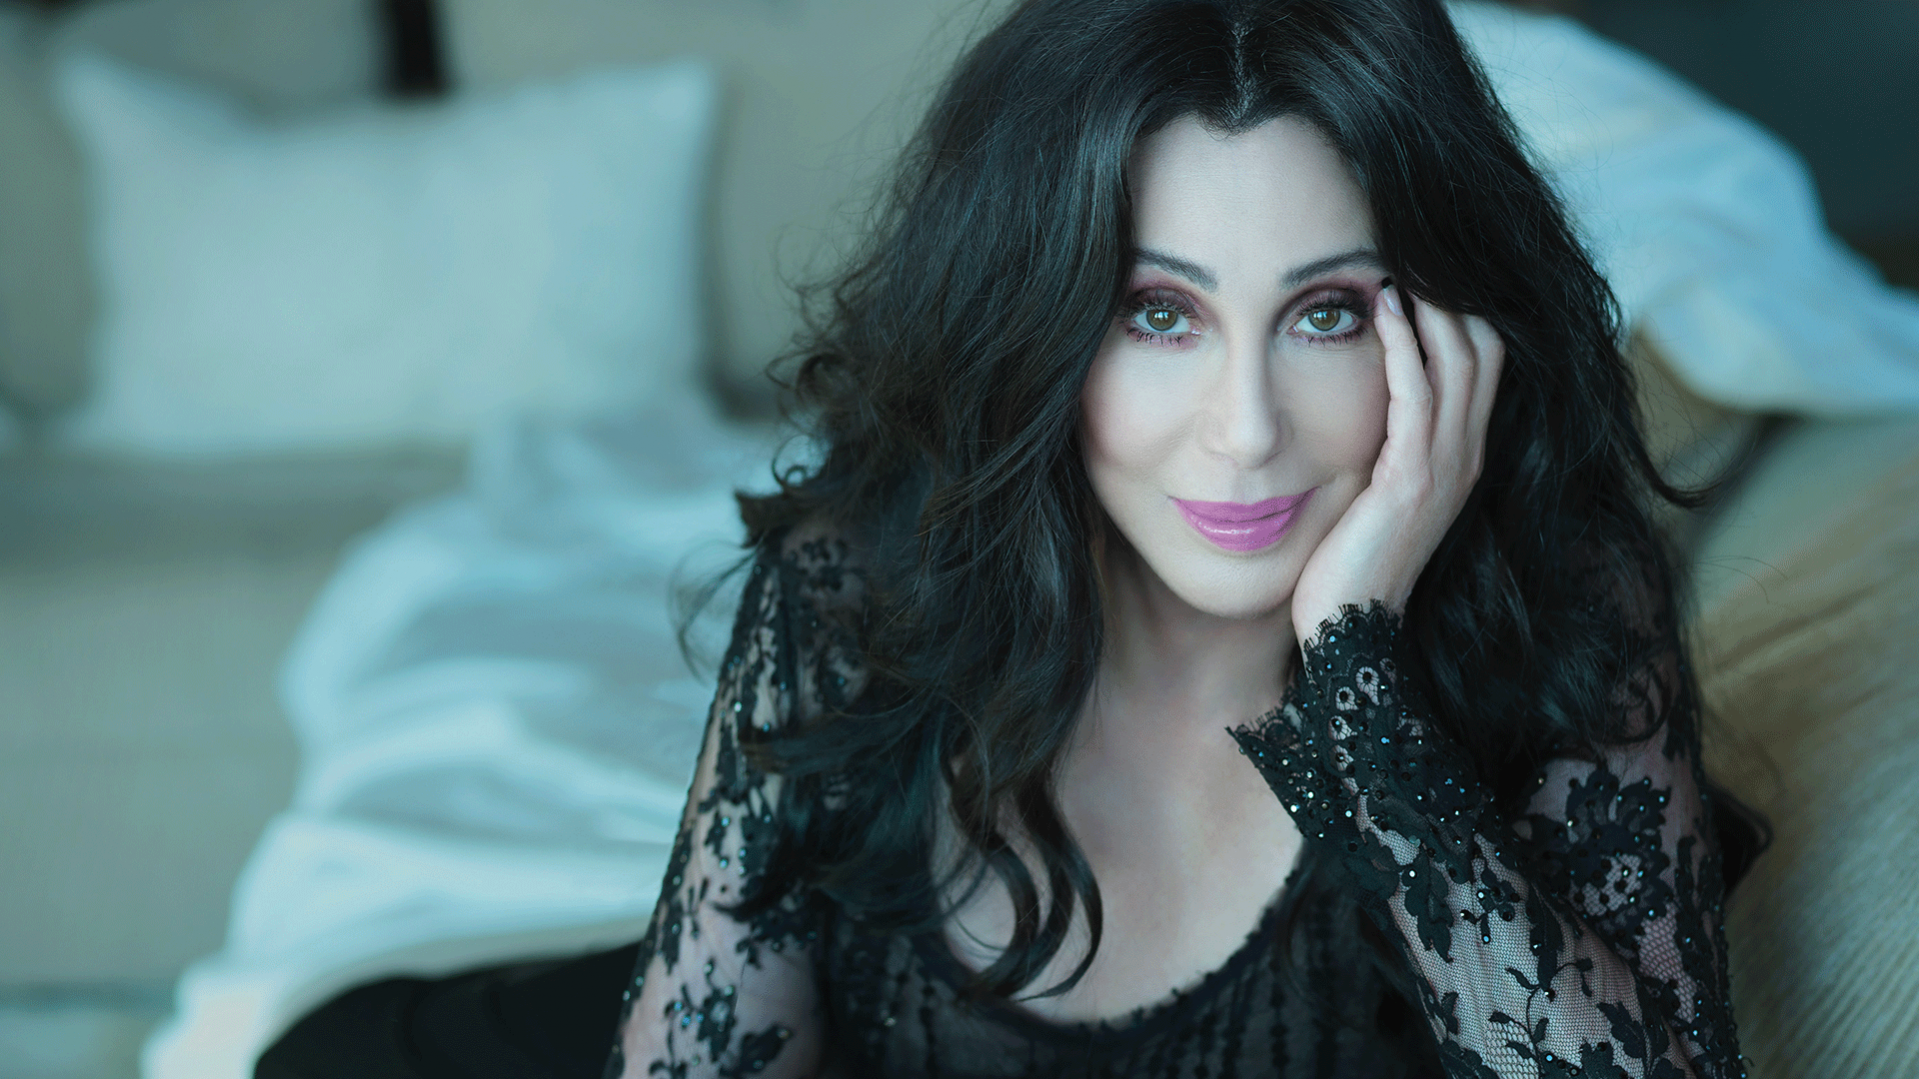 Win tickets to see Cher at the 2018 Mardi Gras Party